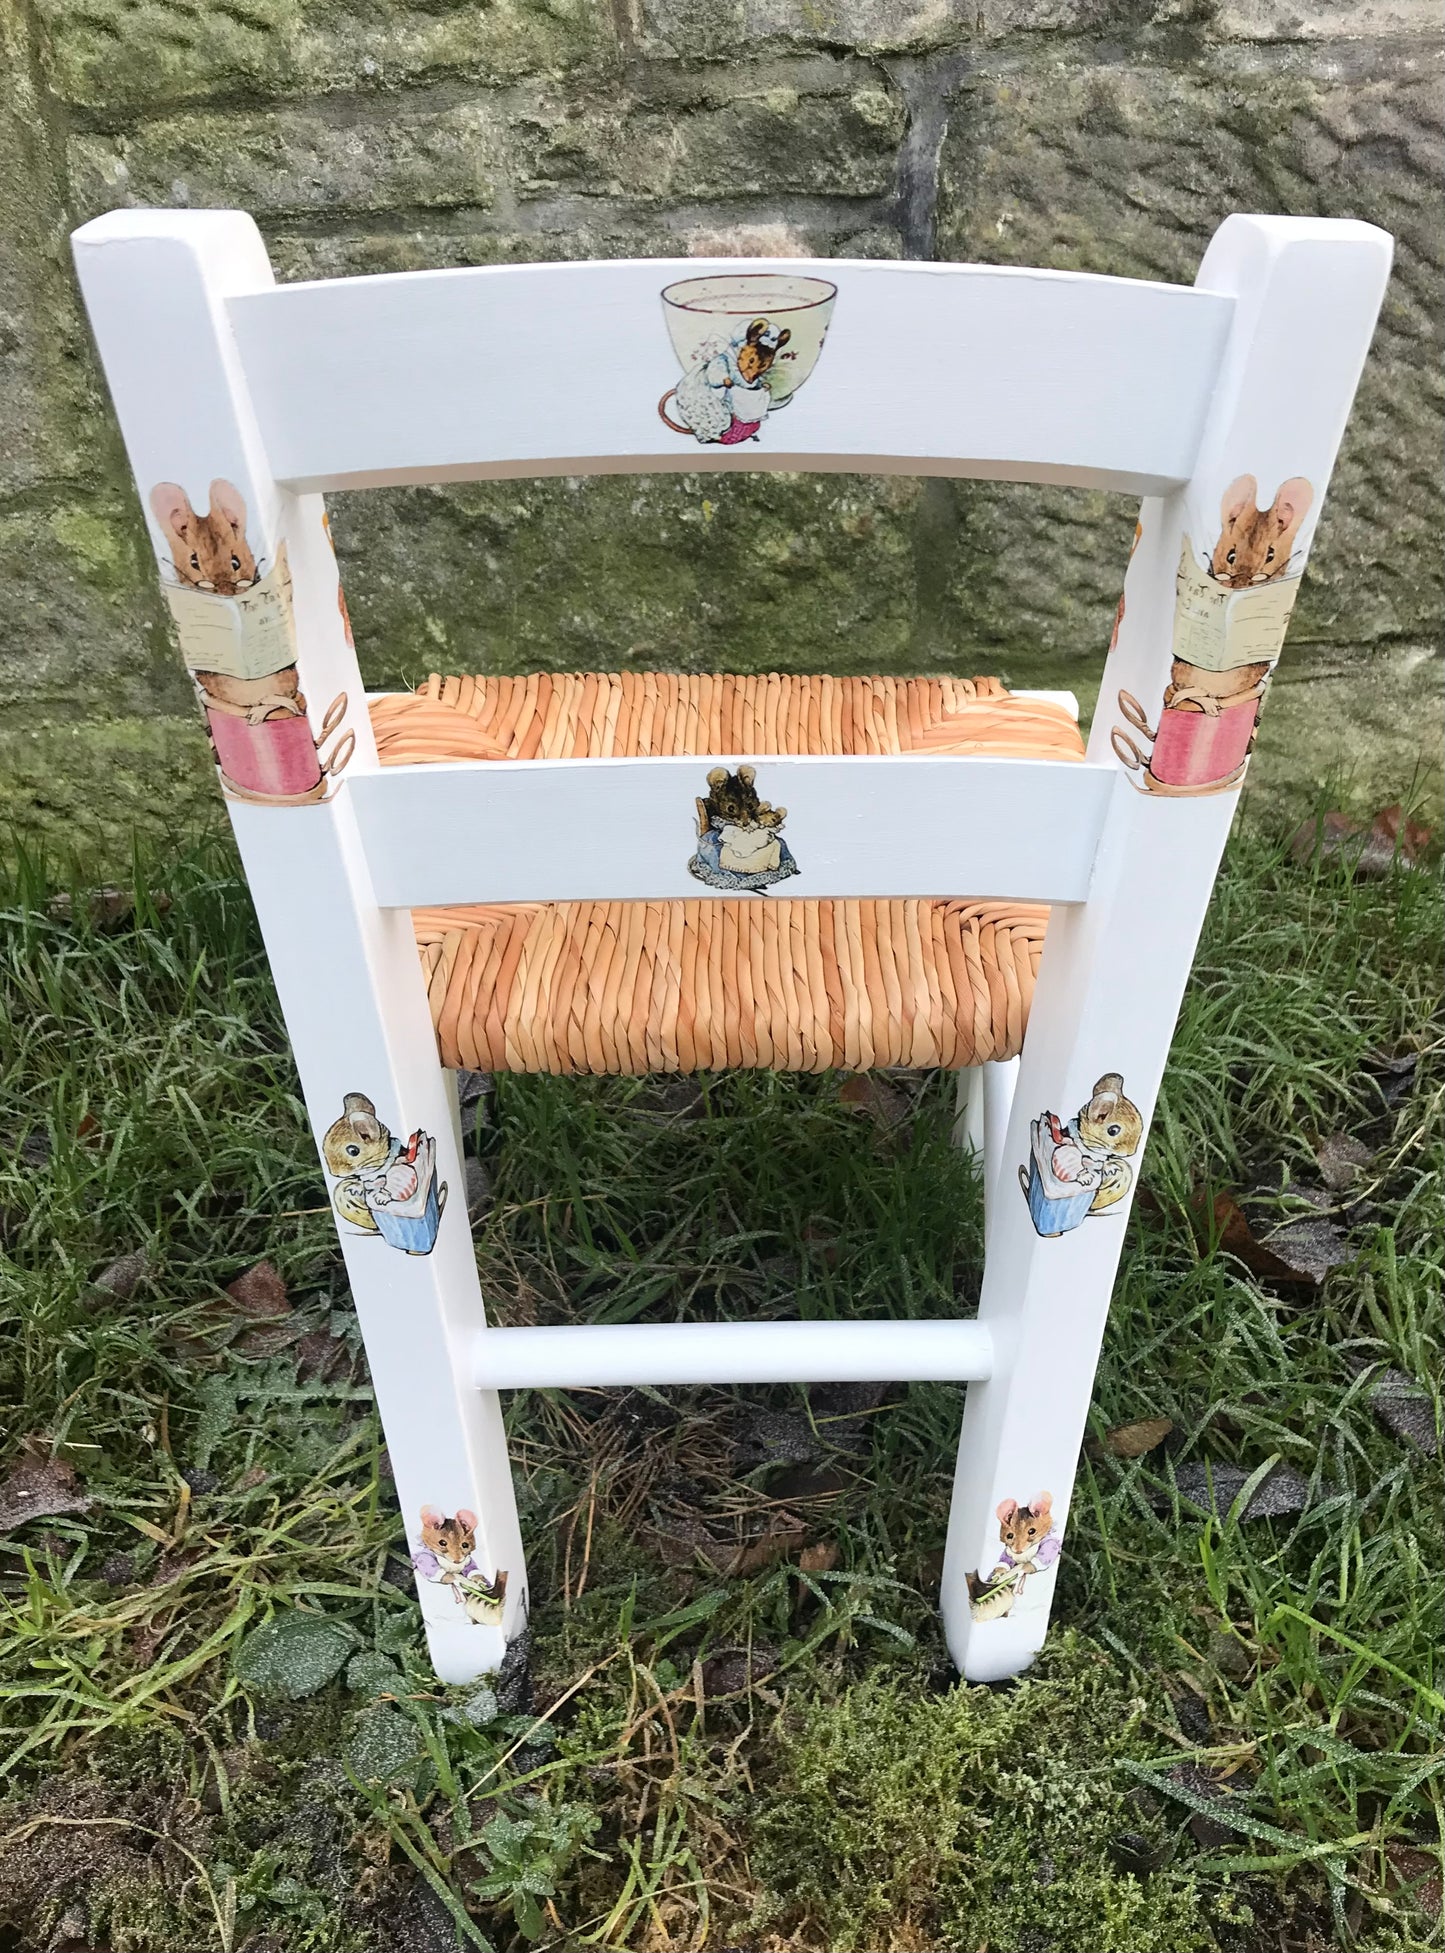 Commission for Margie - personalised children's chair - mouse theme